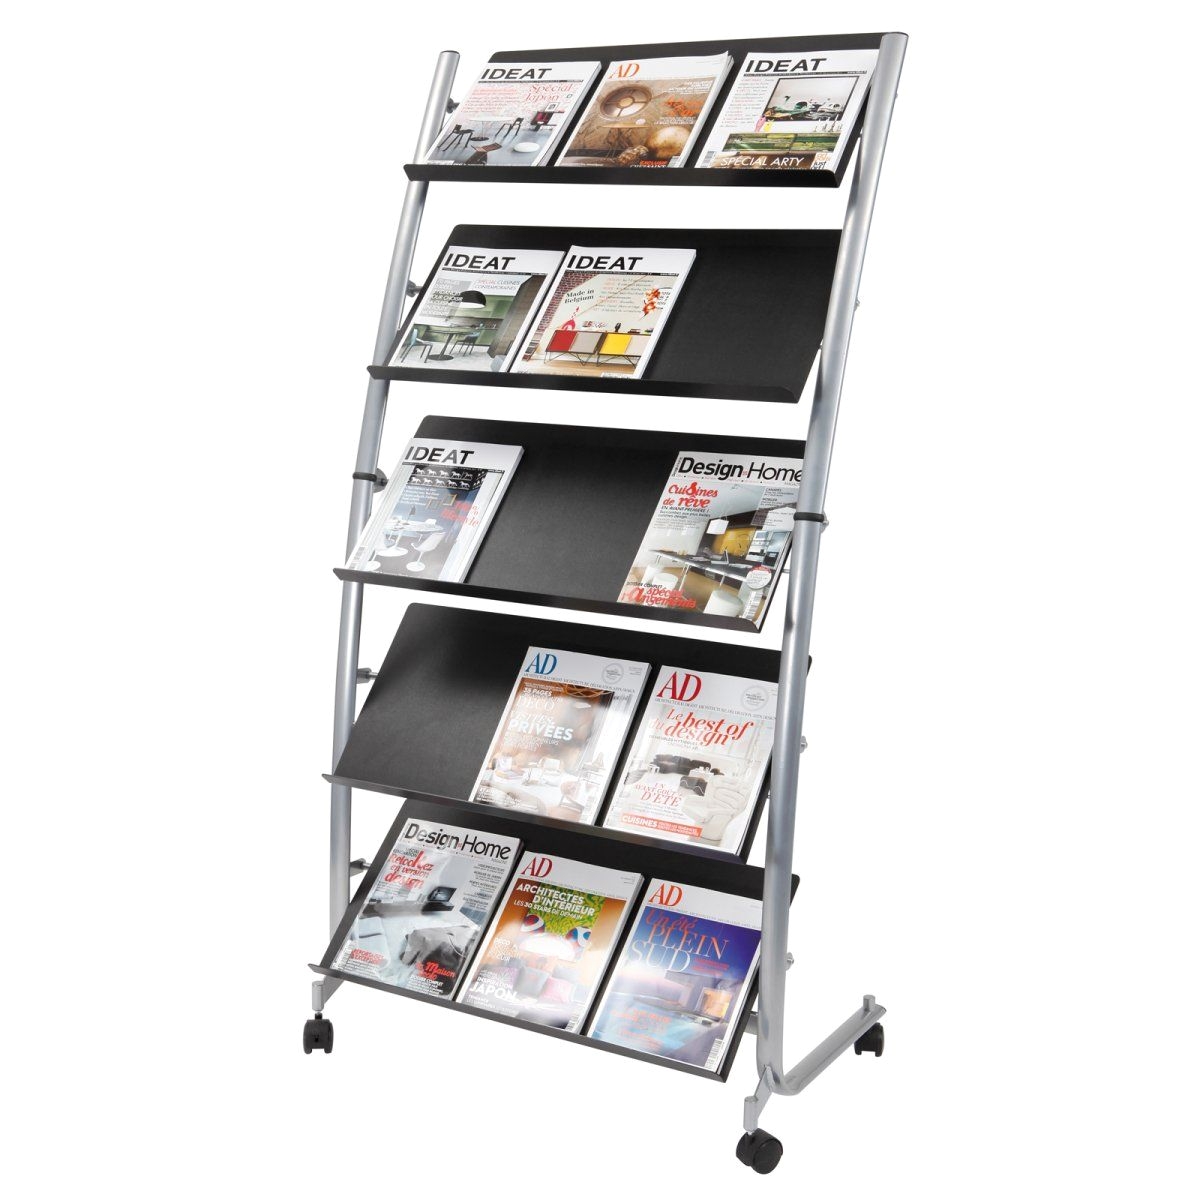 lowest price alba large mobile literature display 5 levels metallic gray and black